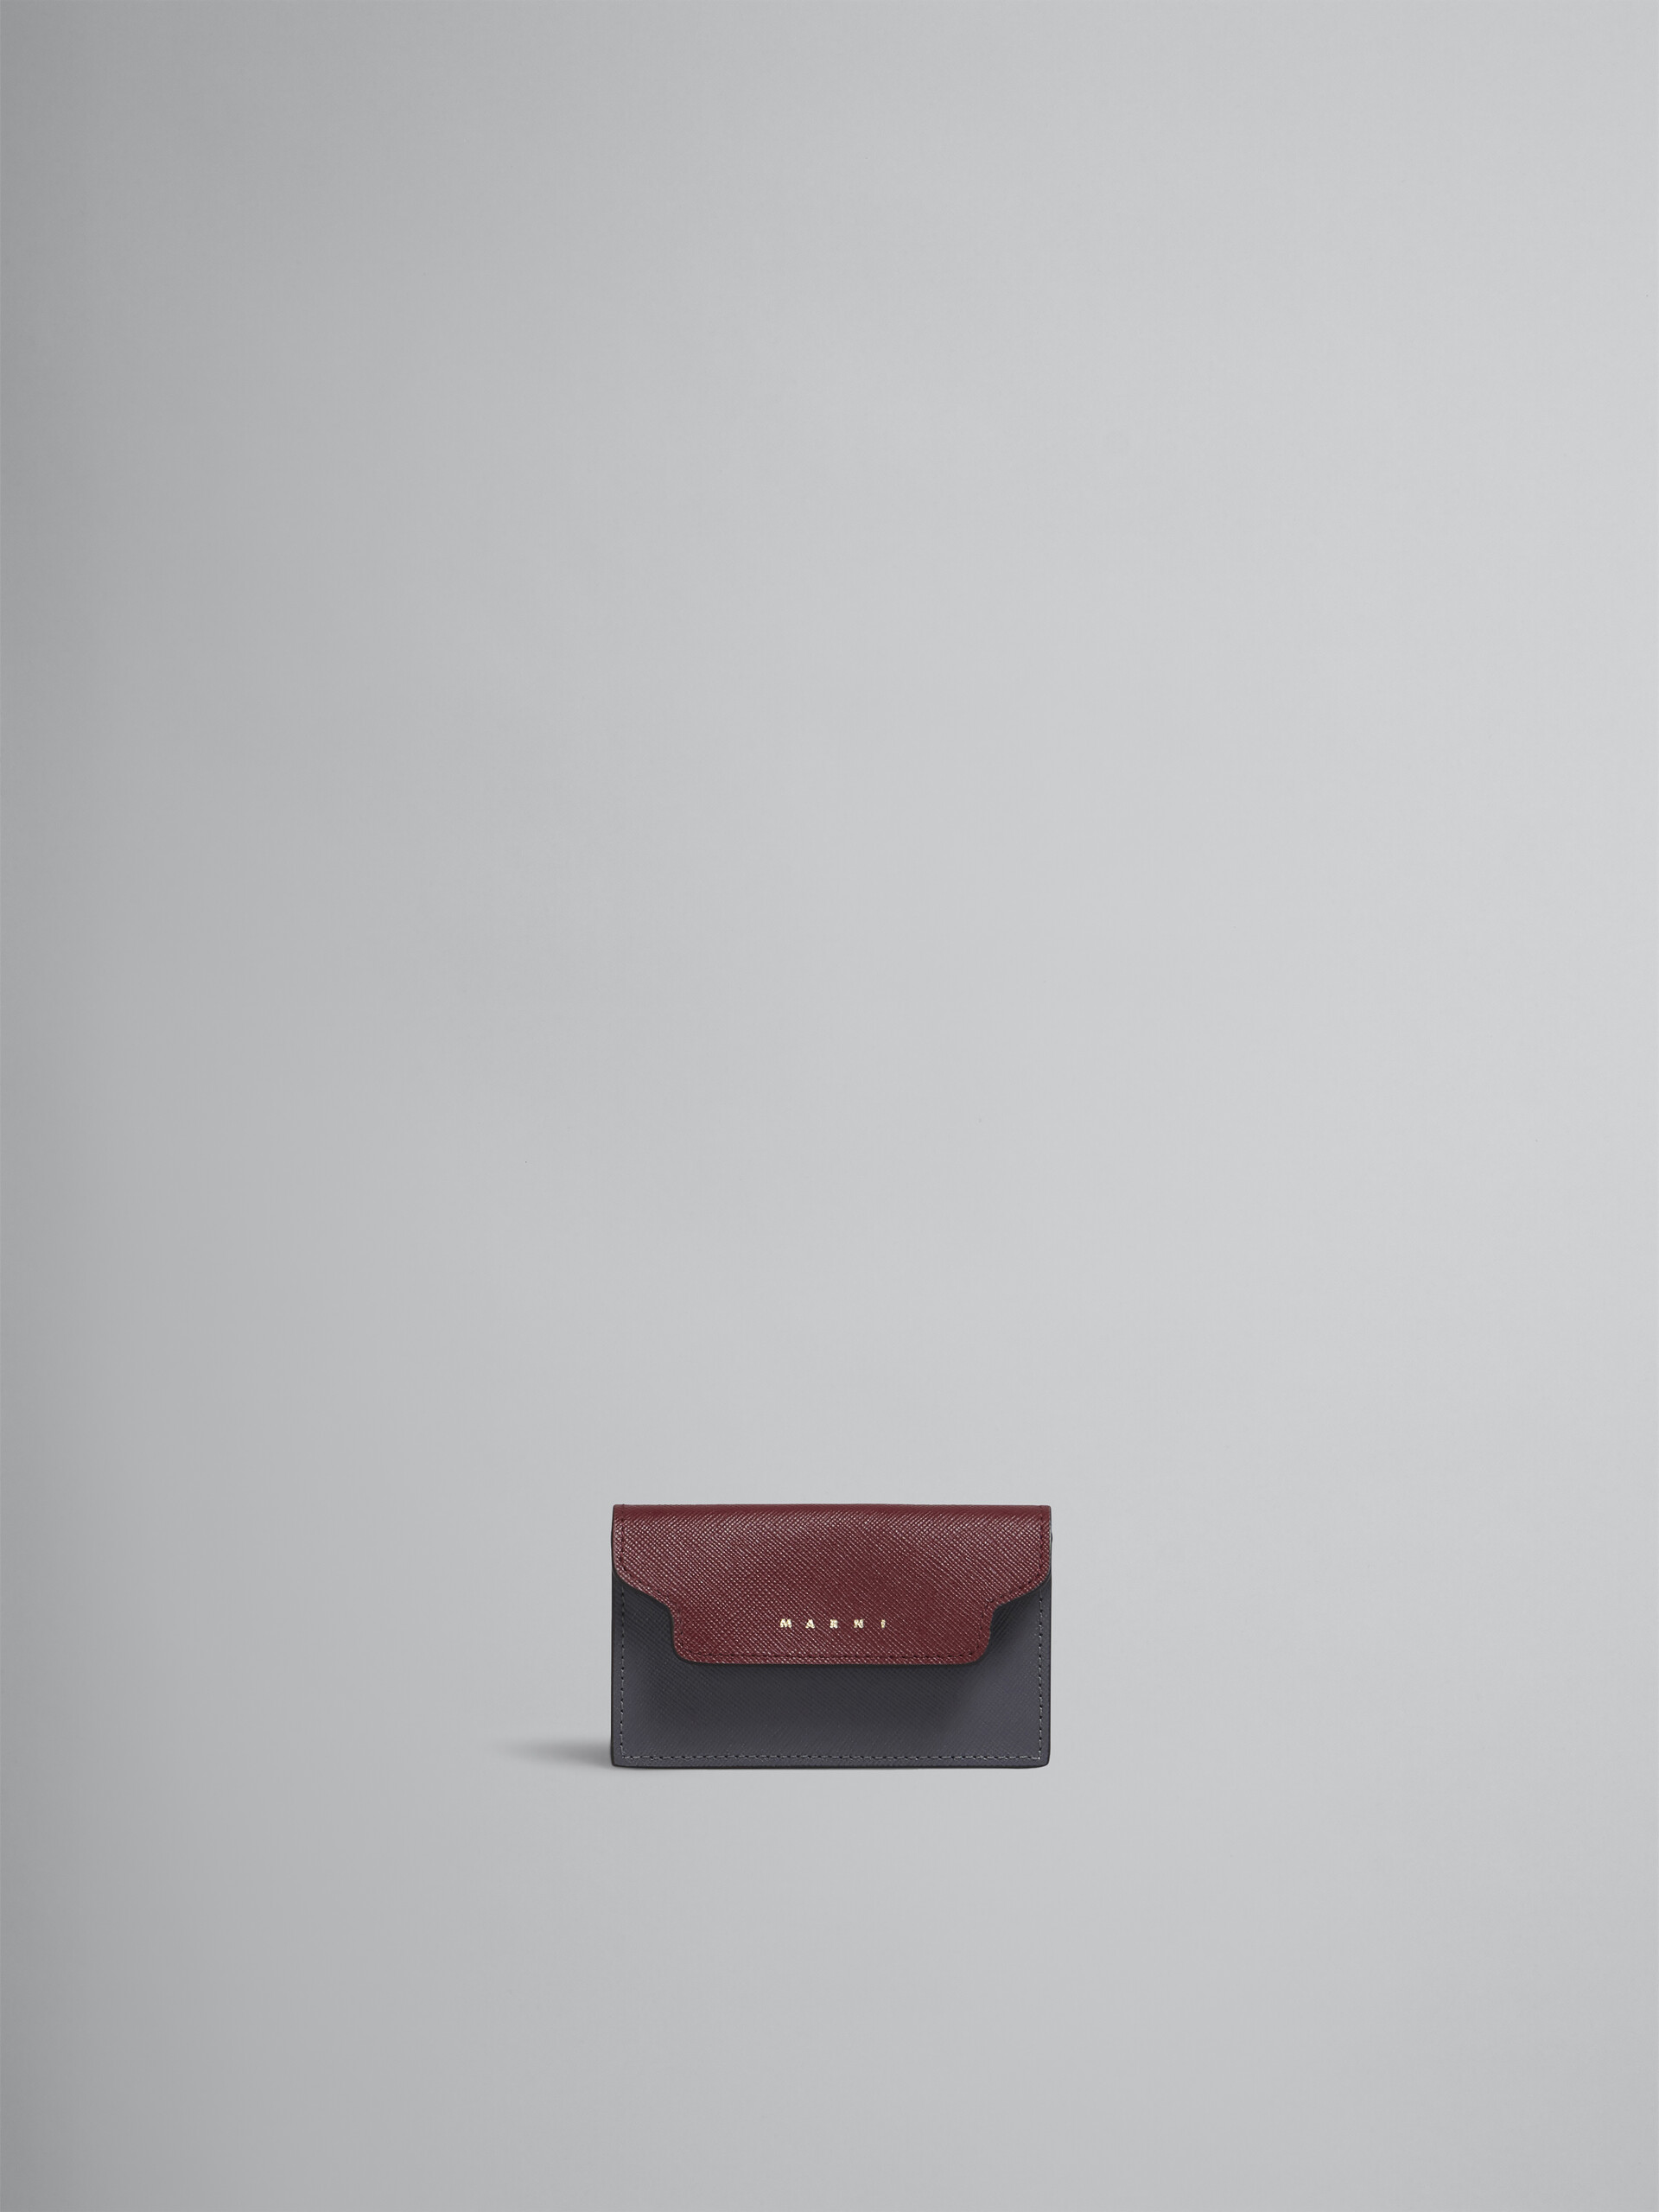 Red pink and grey saffiano leather business card wallet - Wallets - Image 1